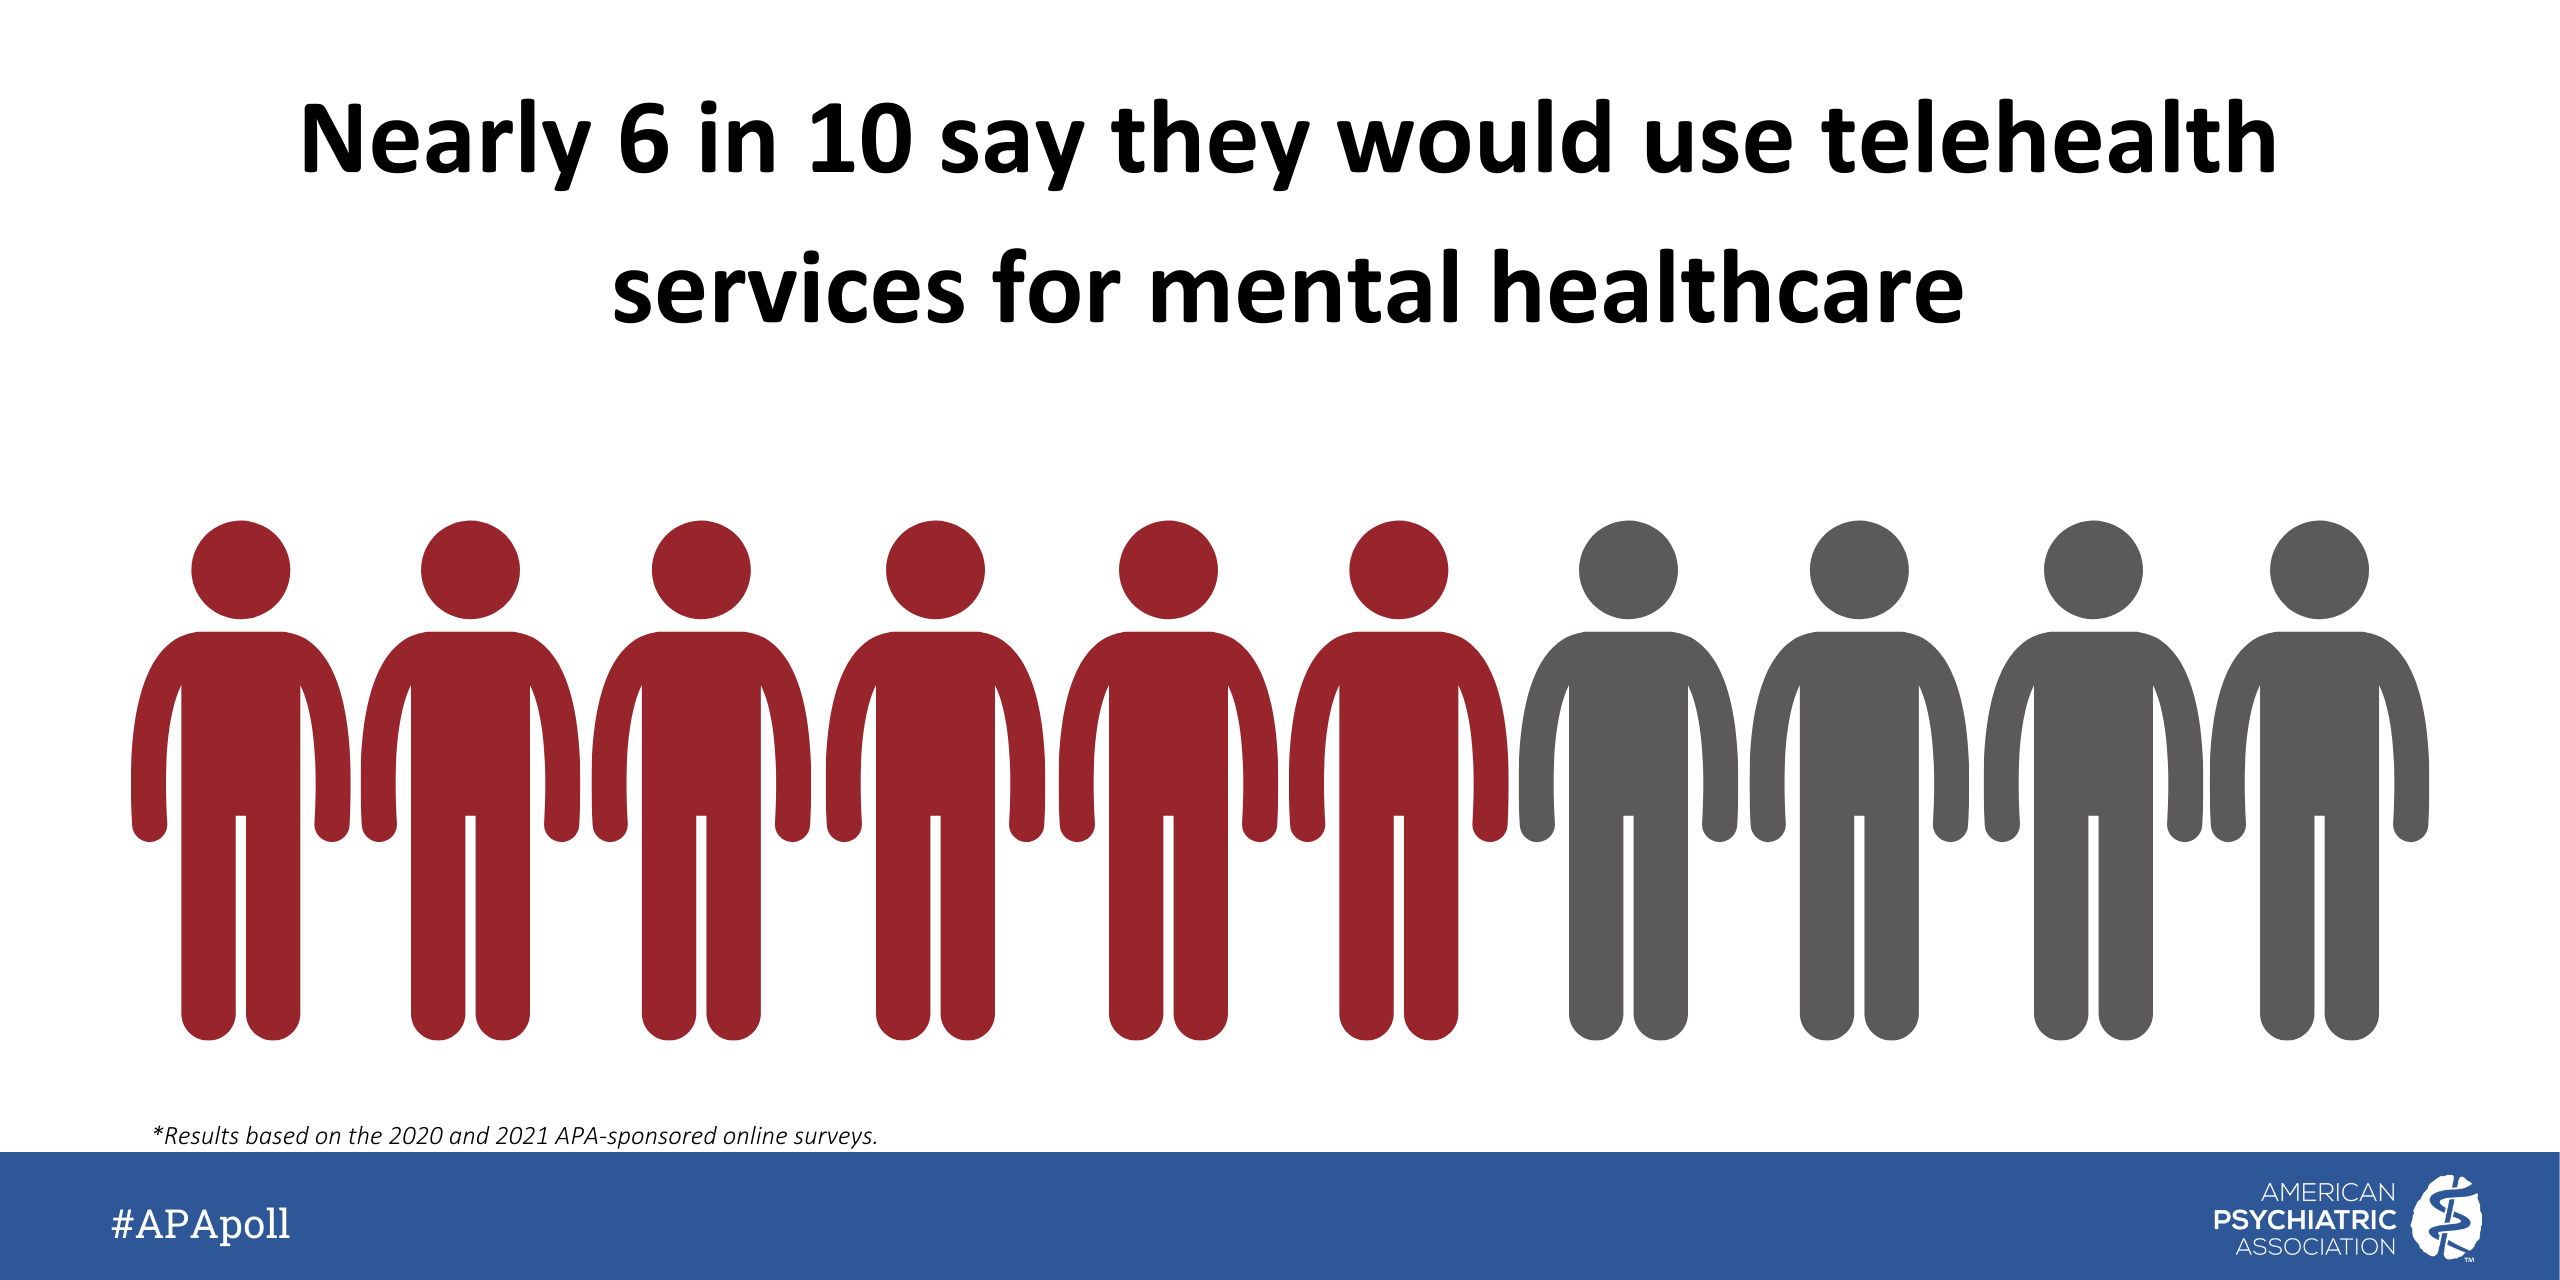 Nearly 6 in 10 say they would use telehealth service for mental healthcare